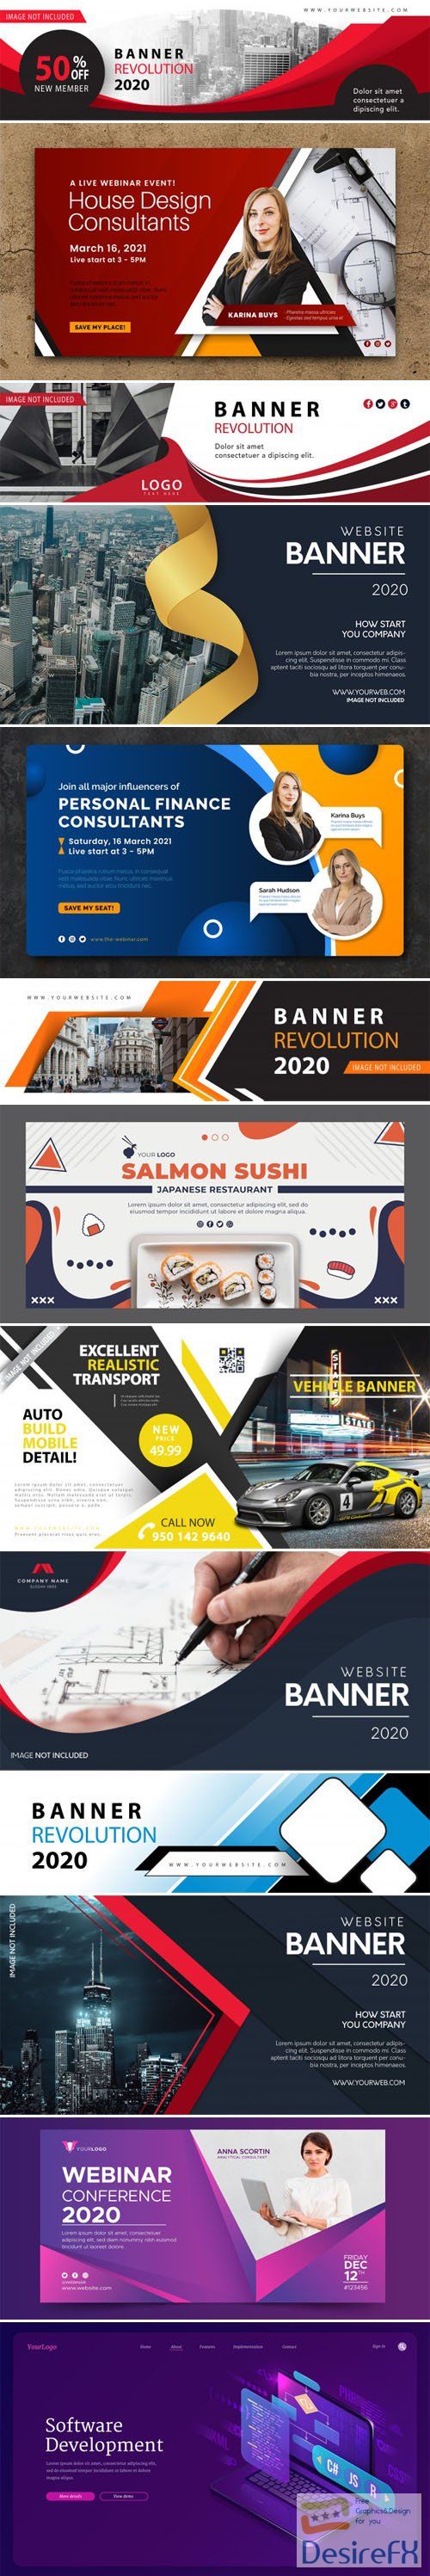 13 Multipurpose Web Banners Vector Collection